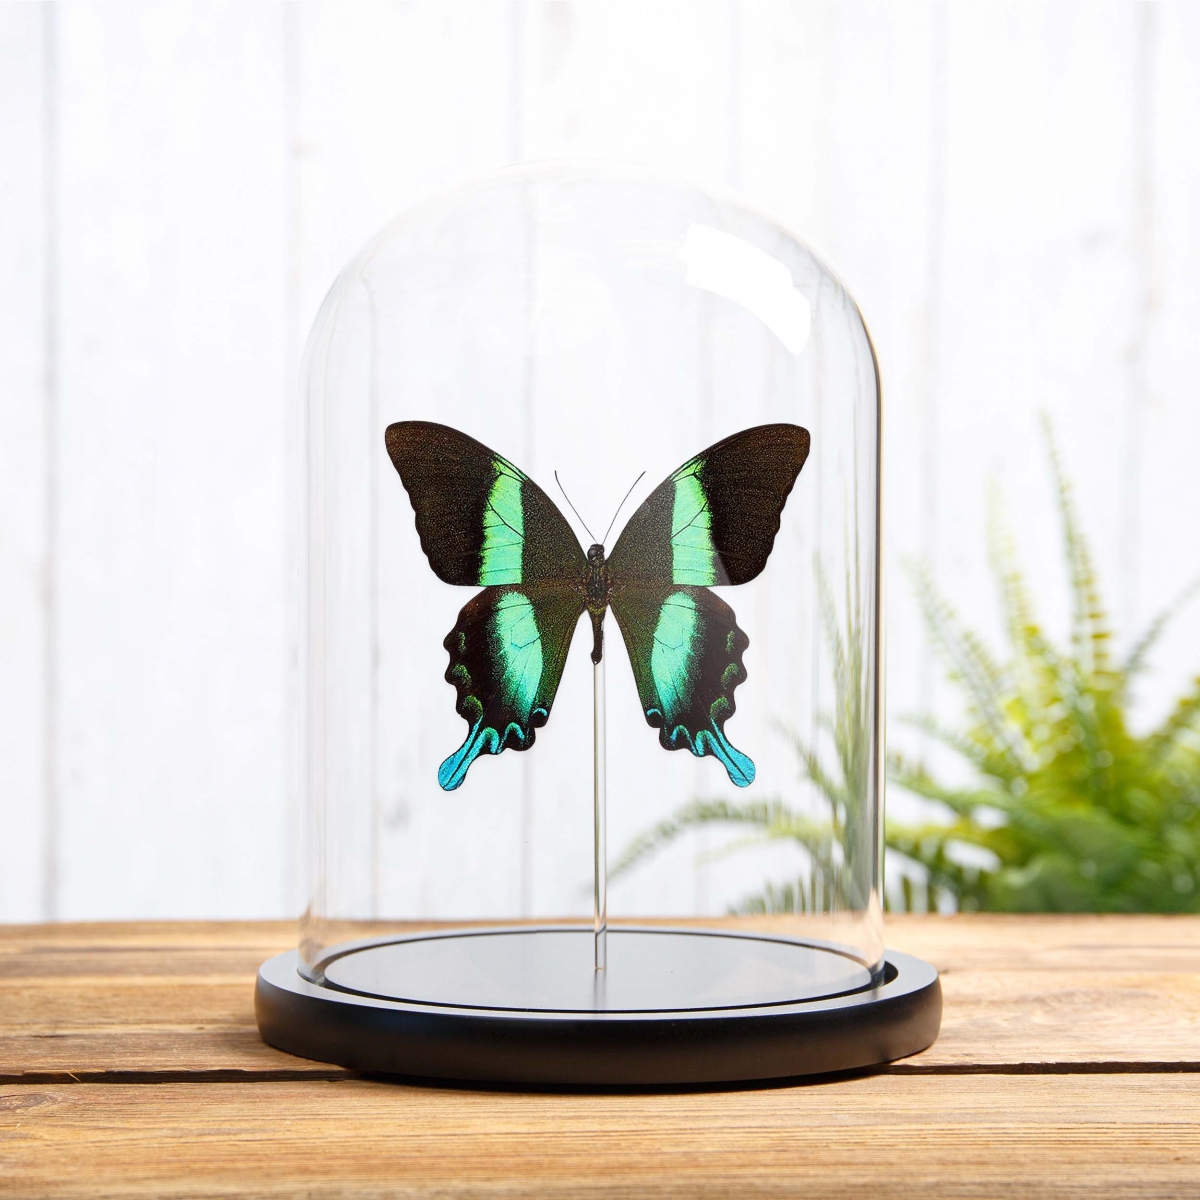 Minibeast The Peacock Butterfly in Glass Dome with Wooden Base (Papilio blumei)